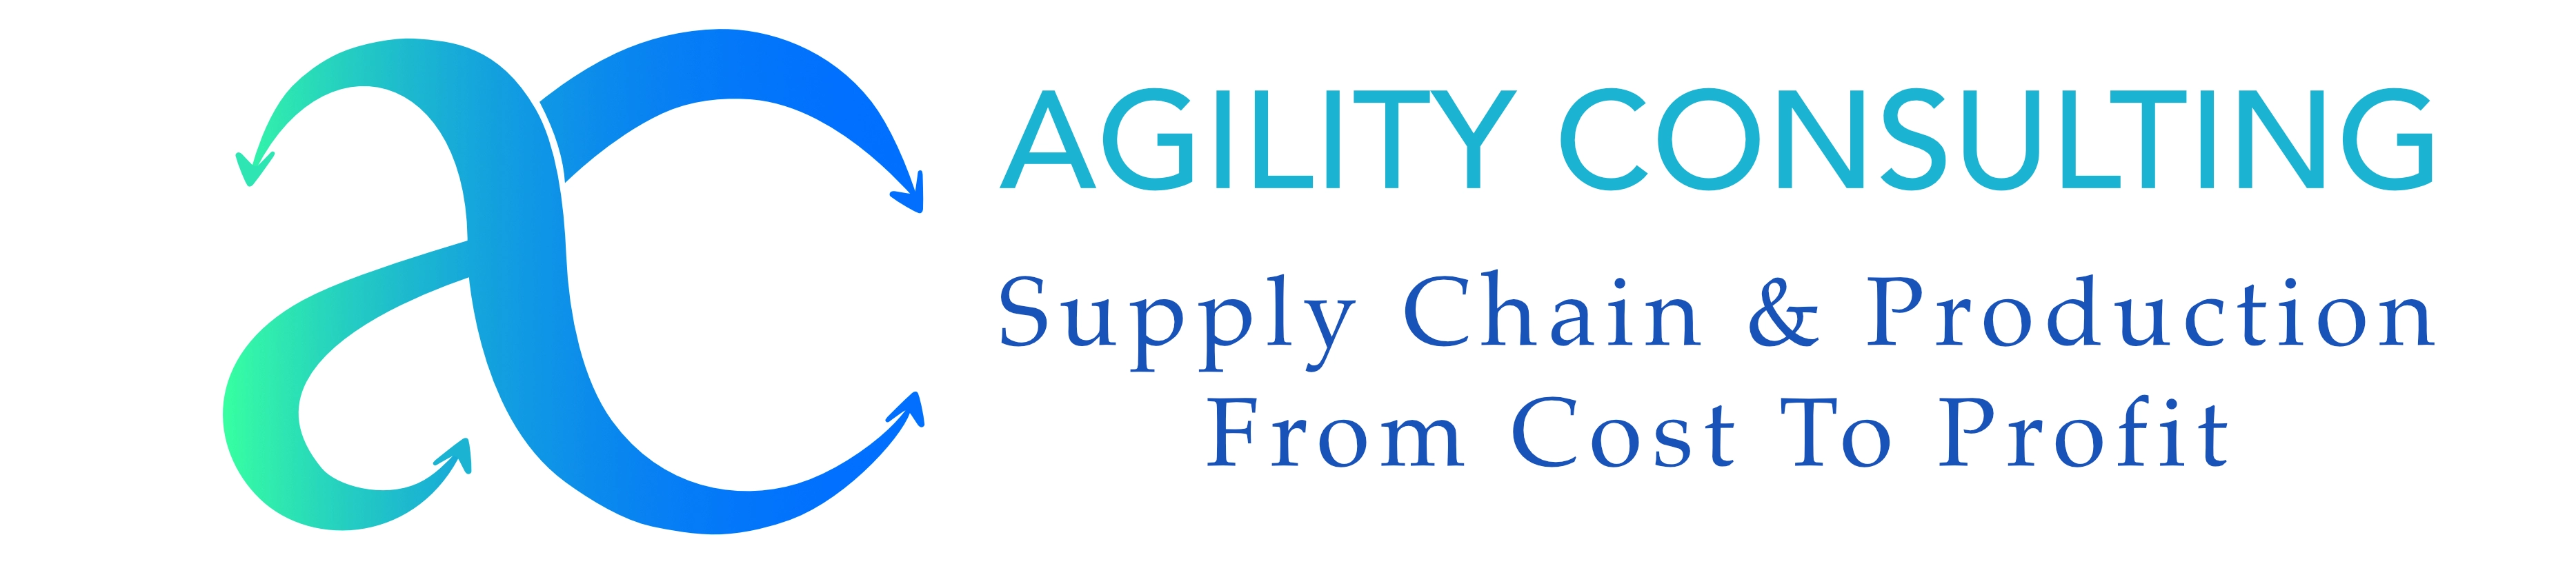 https://www.agilityconsulting.be/wp-content/uploads/2021/03/Logo-Agility-Consulting-scaled.jpg